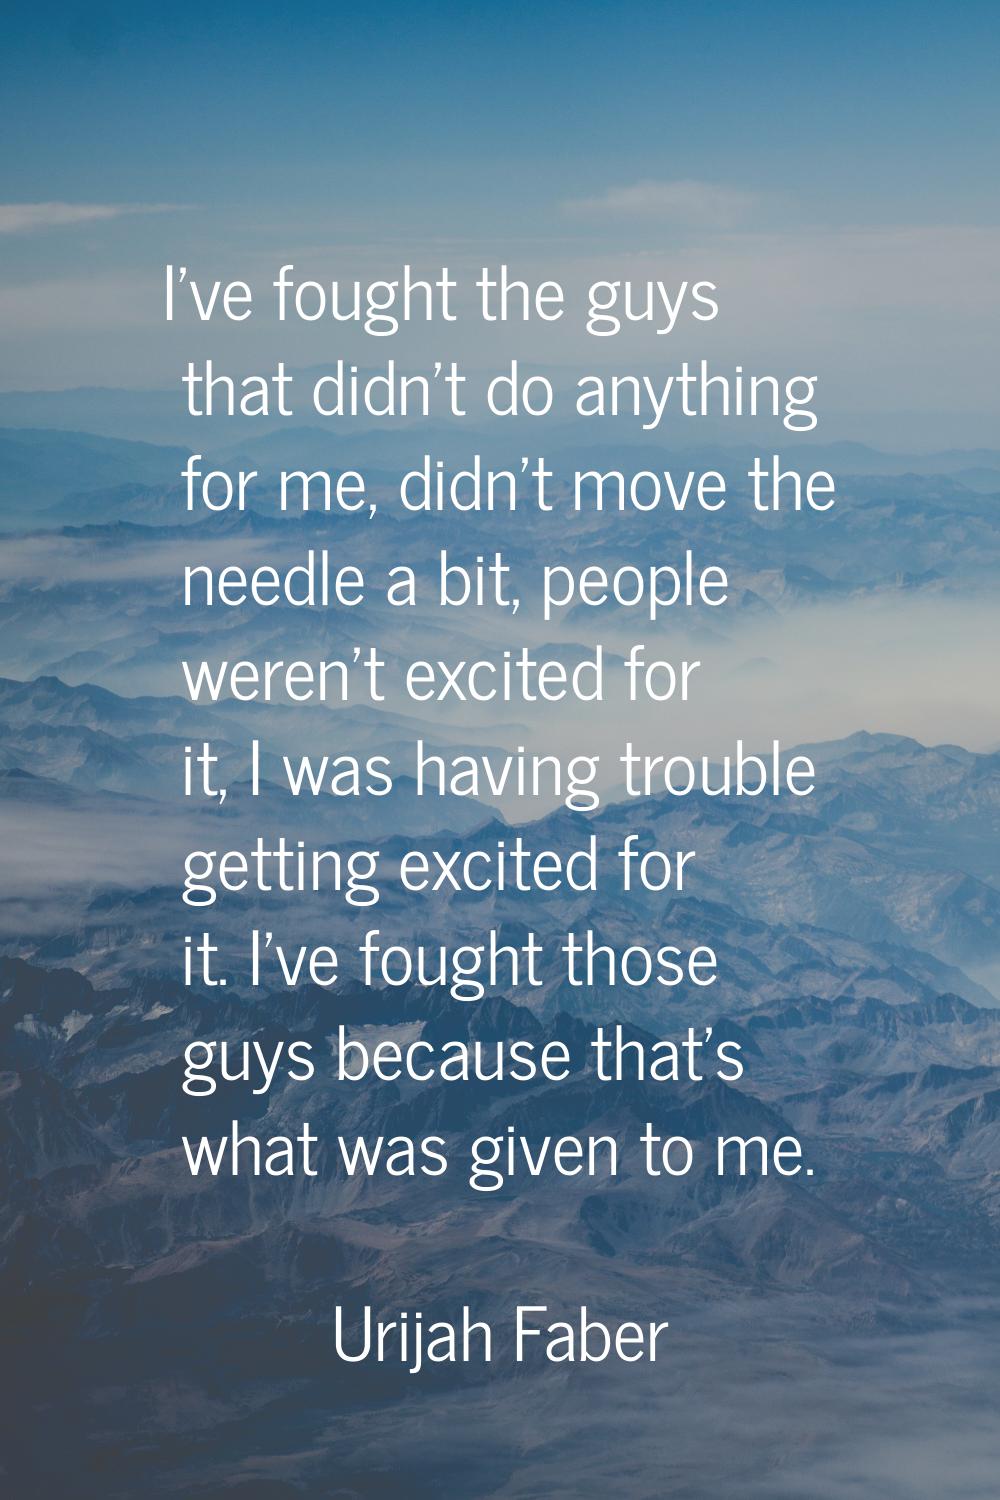 I've fought the guys that didn't do anything for me, didn't move the needle a bit, people weren't e